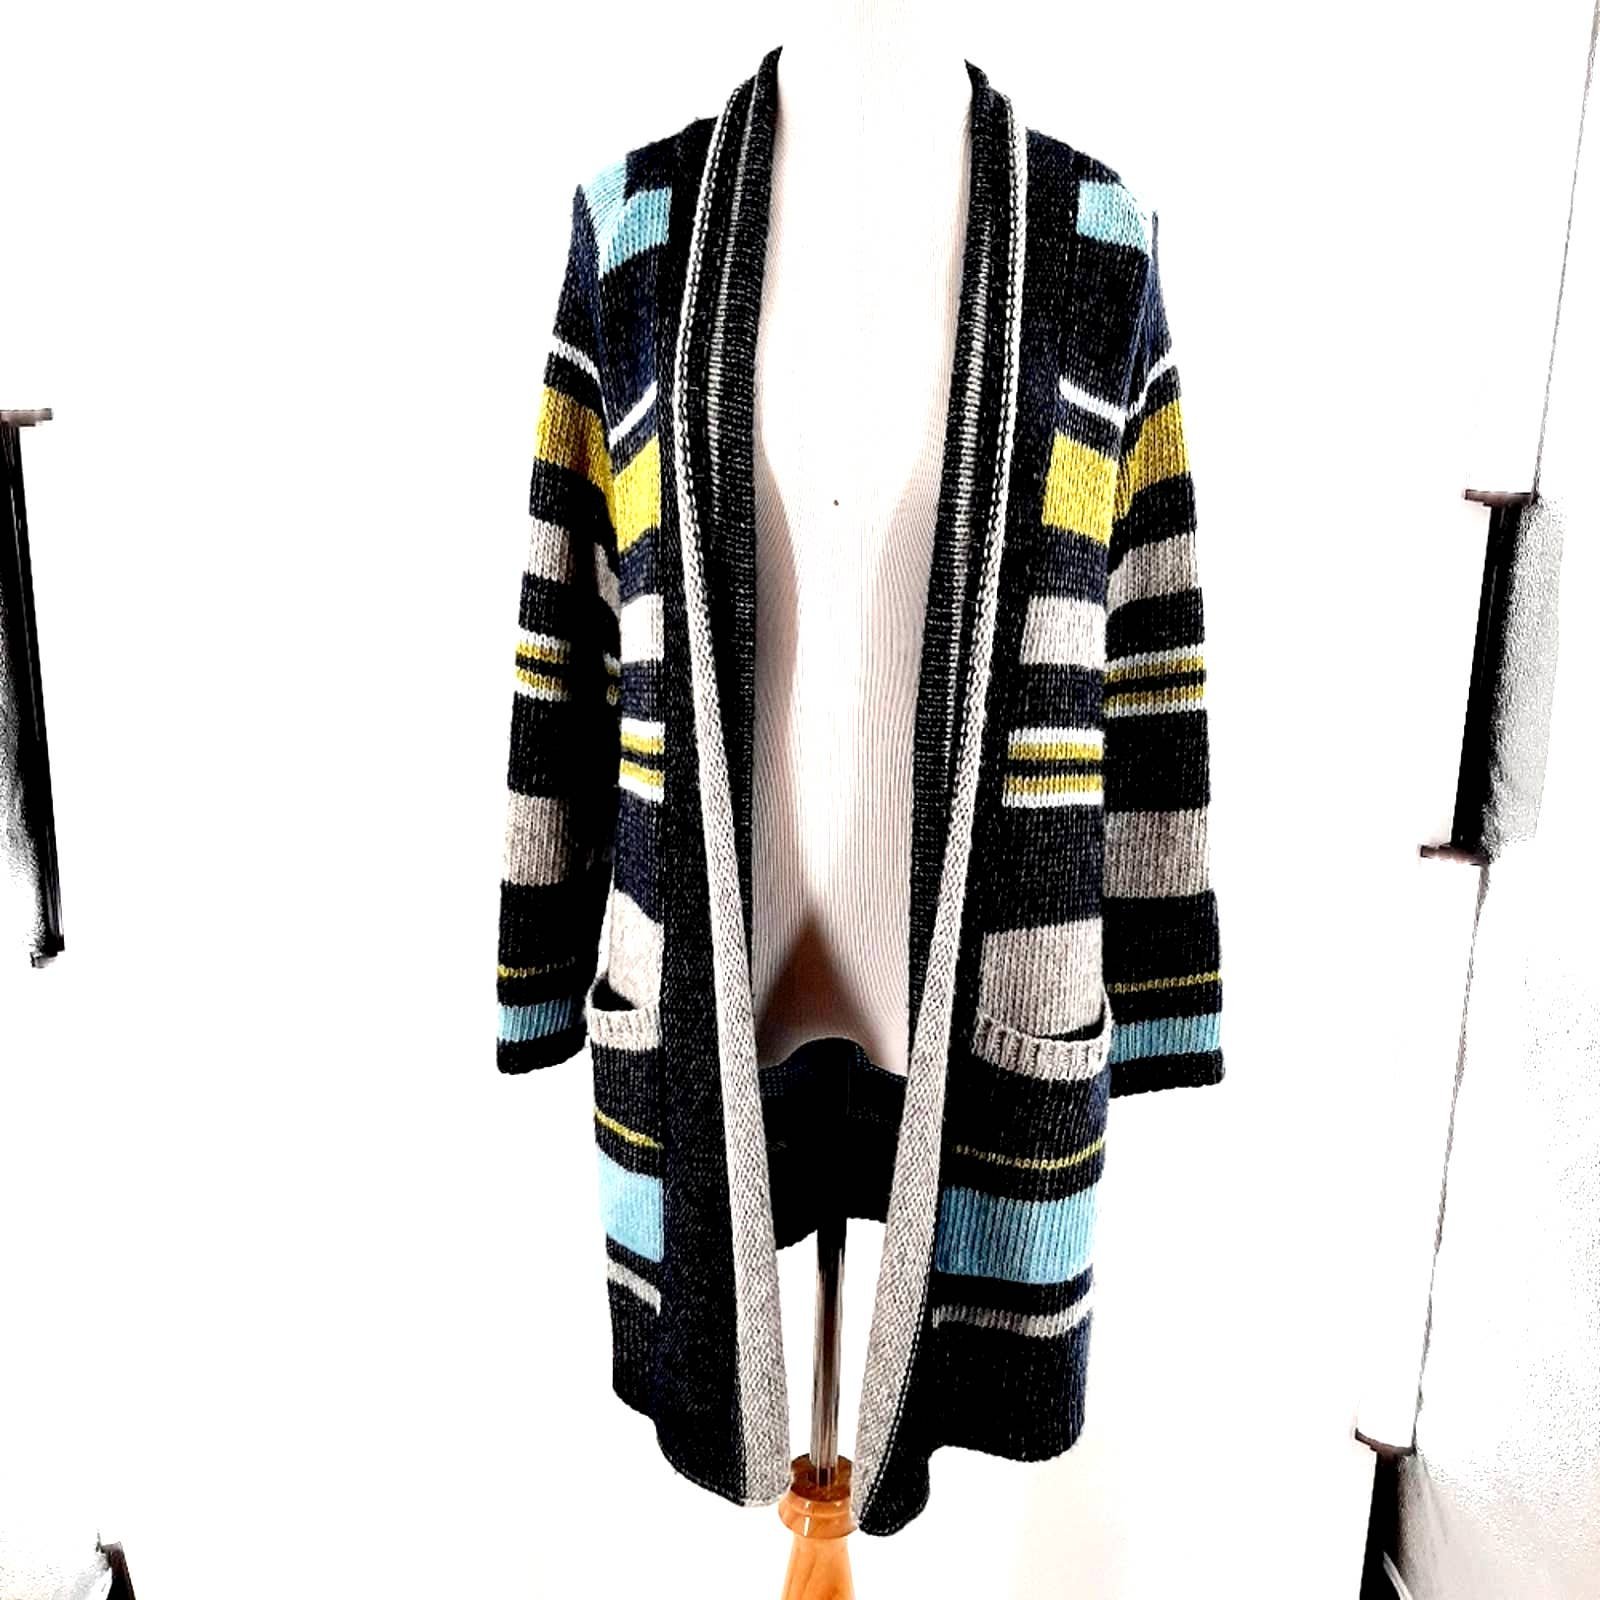 Affordable J. Jill open long line striped cardigan sweater in size XS. JVexnGi7v for sale